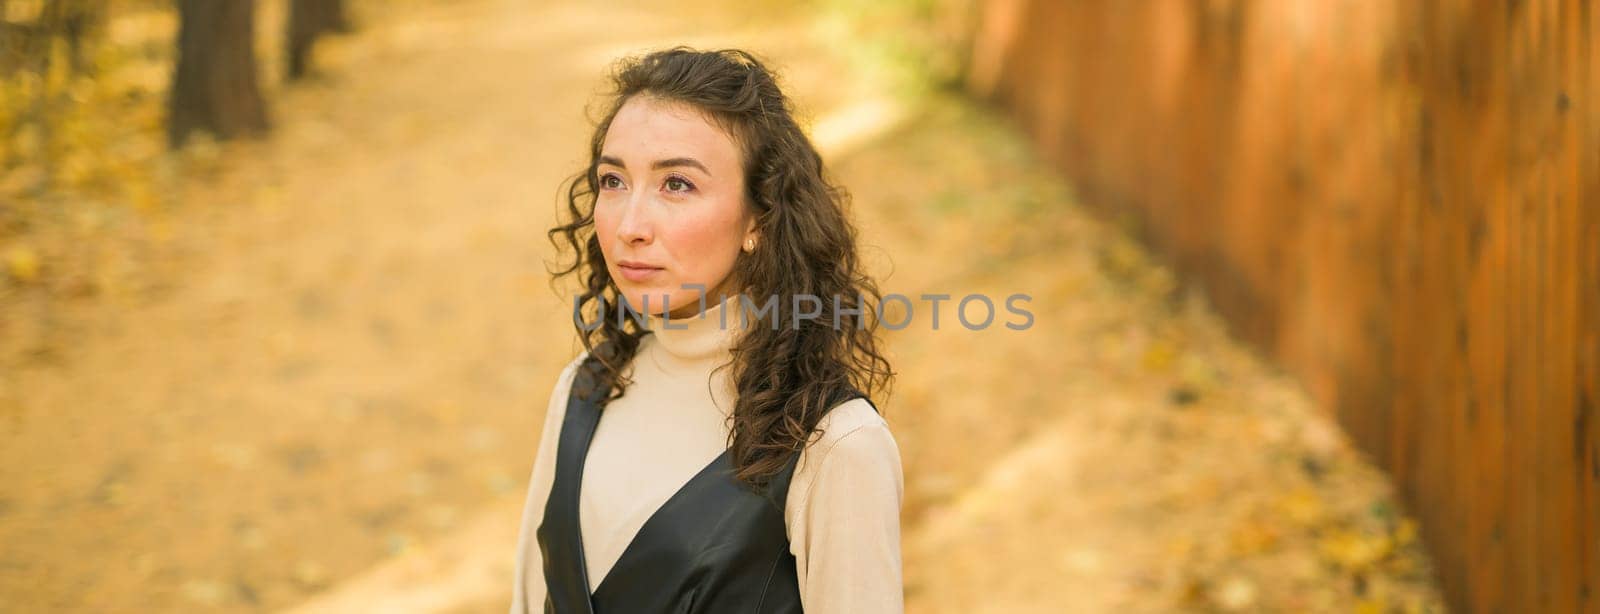 Banner autumn portrait of a beautiful happy curly woman in fall season copy space mockup. Millennial generation female. Natural beauty concept by Satura86